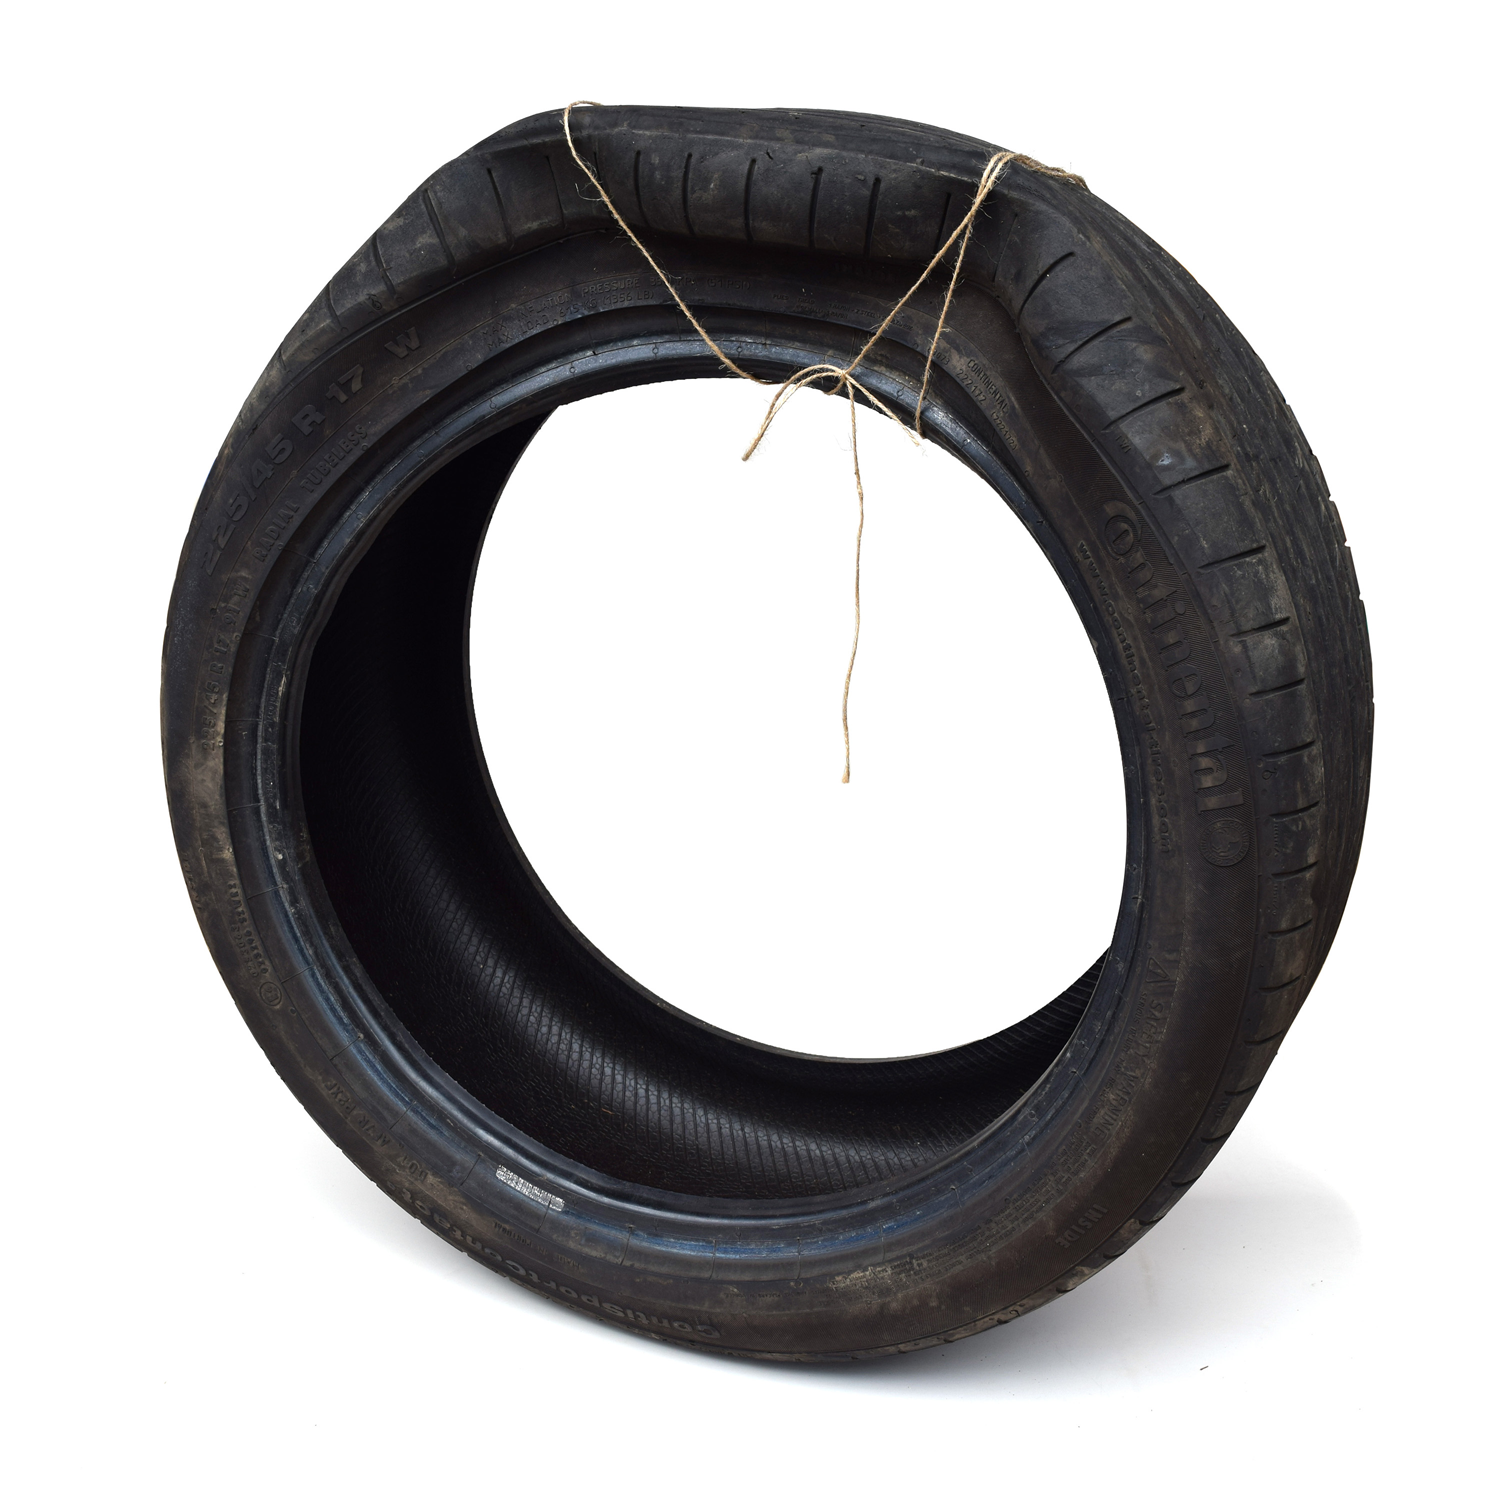 A deformed car tire wrapped with a piece of twine